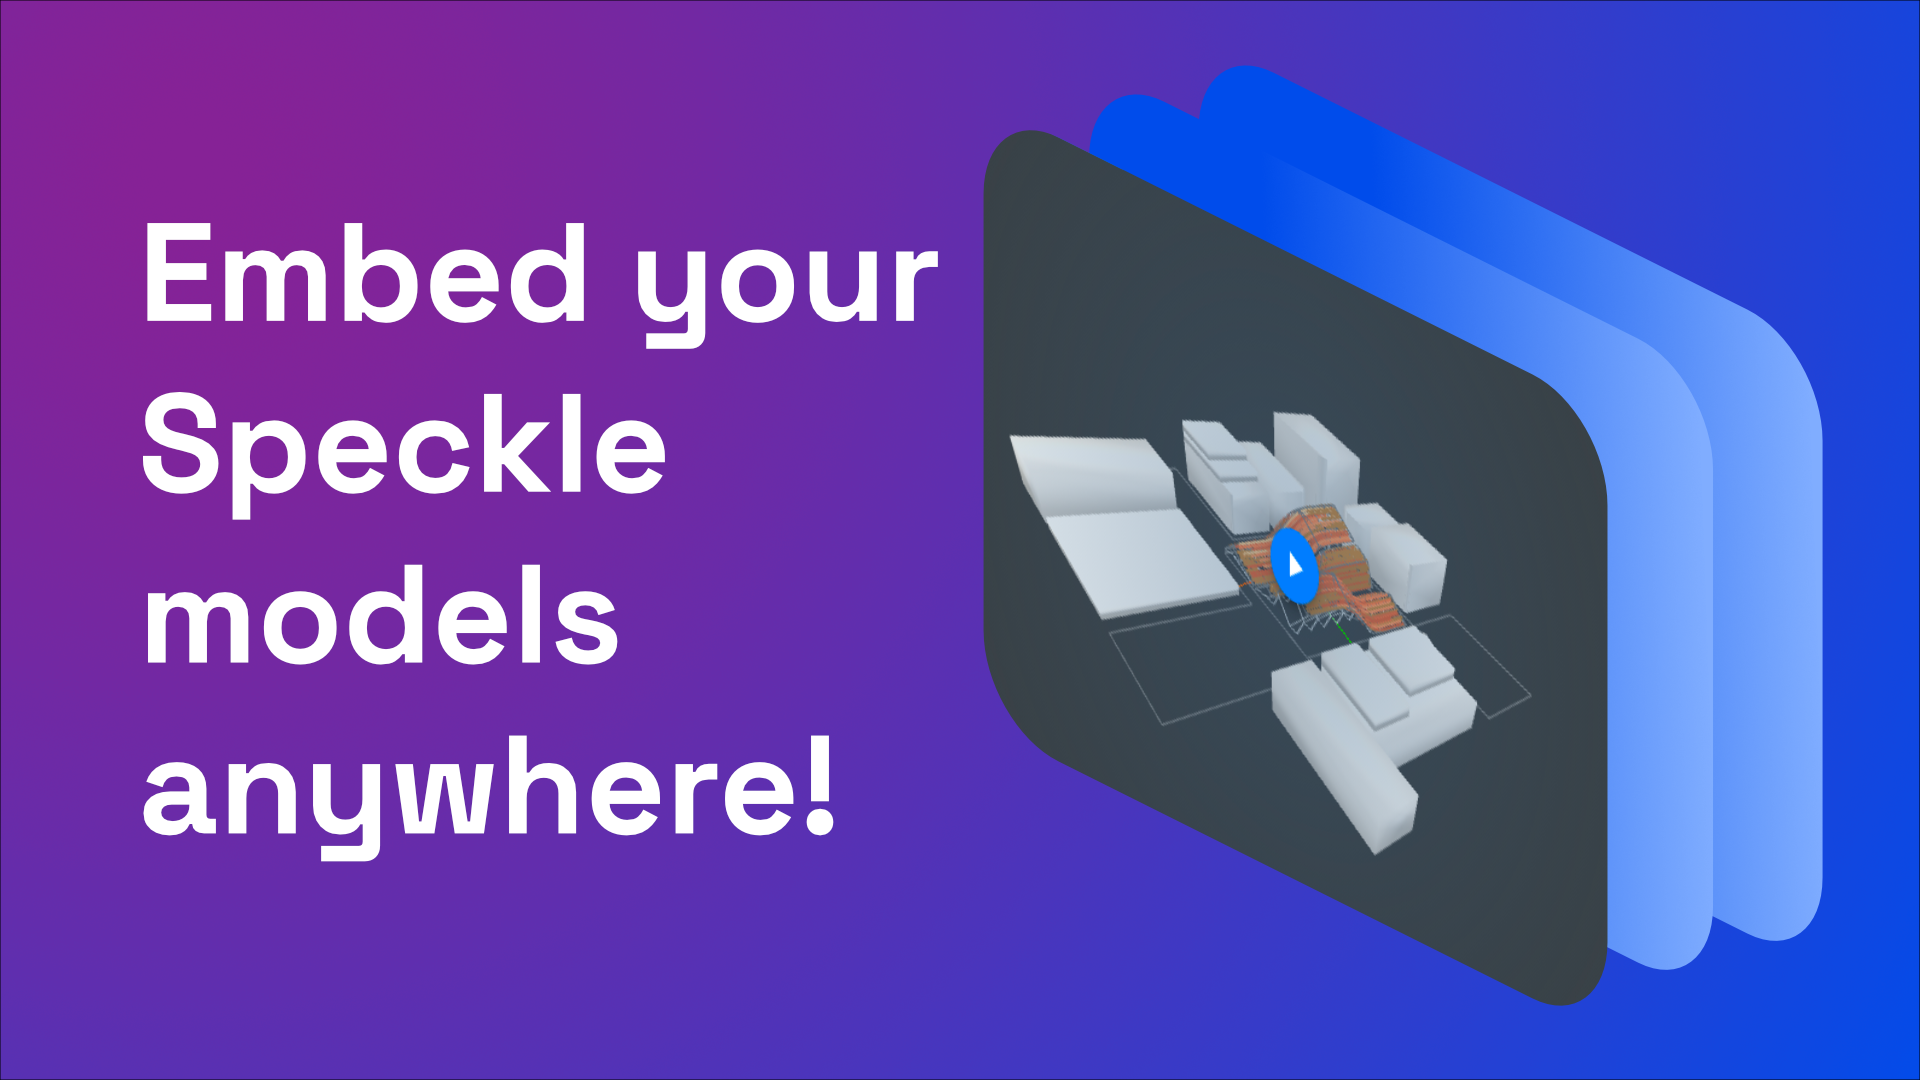 Embed your Speckle models anywhere!